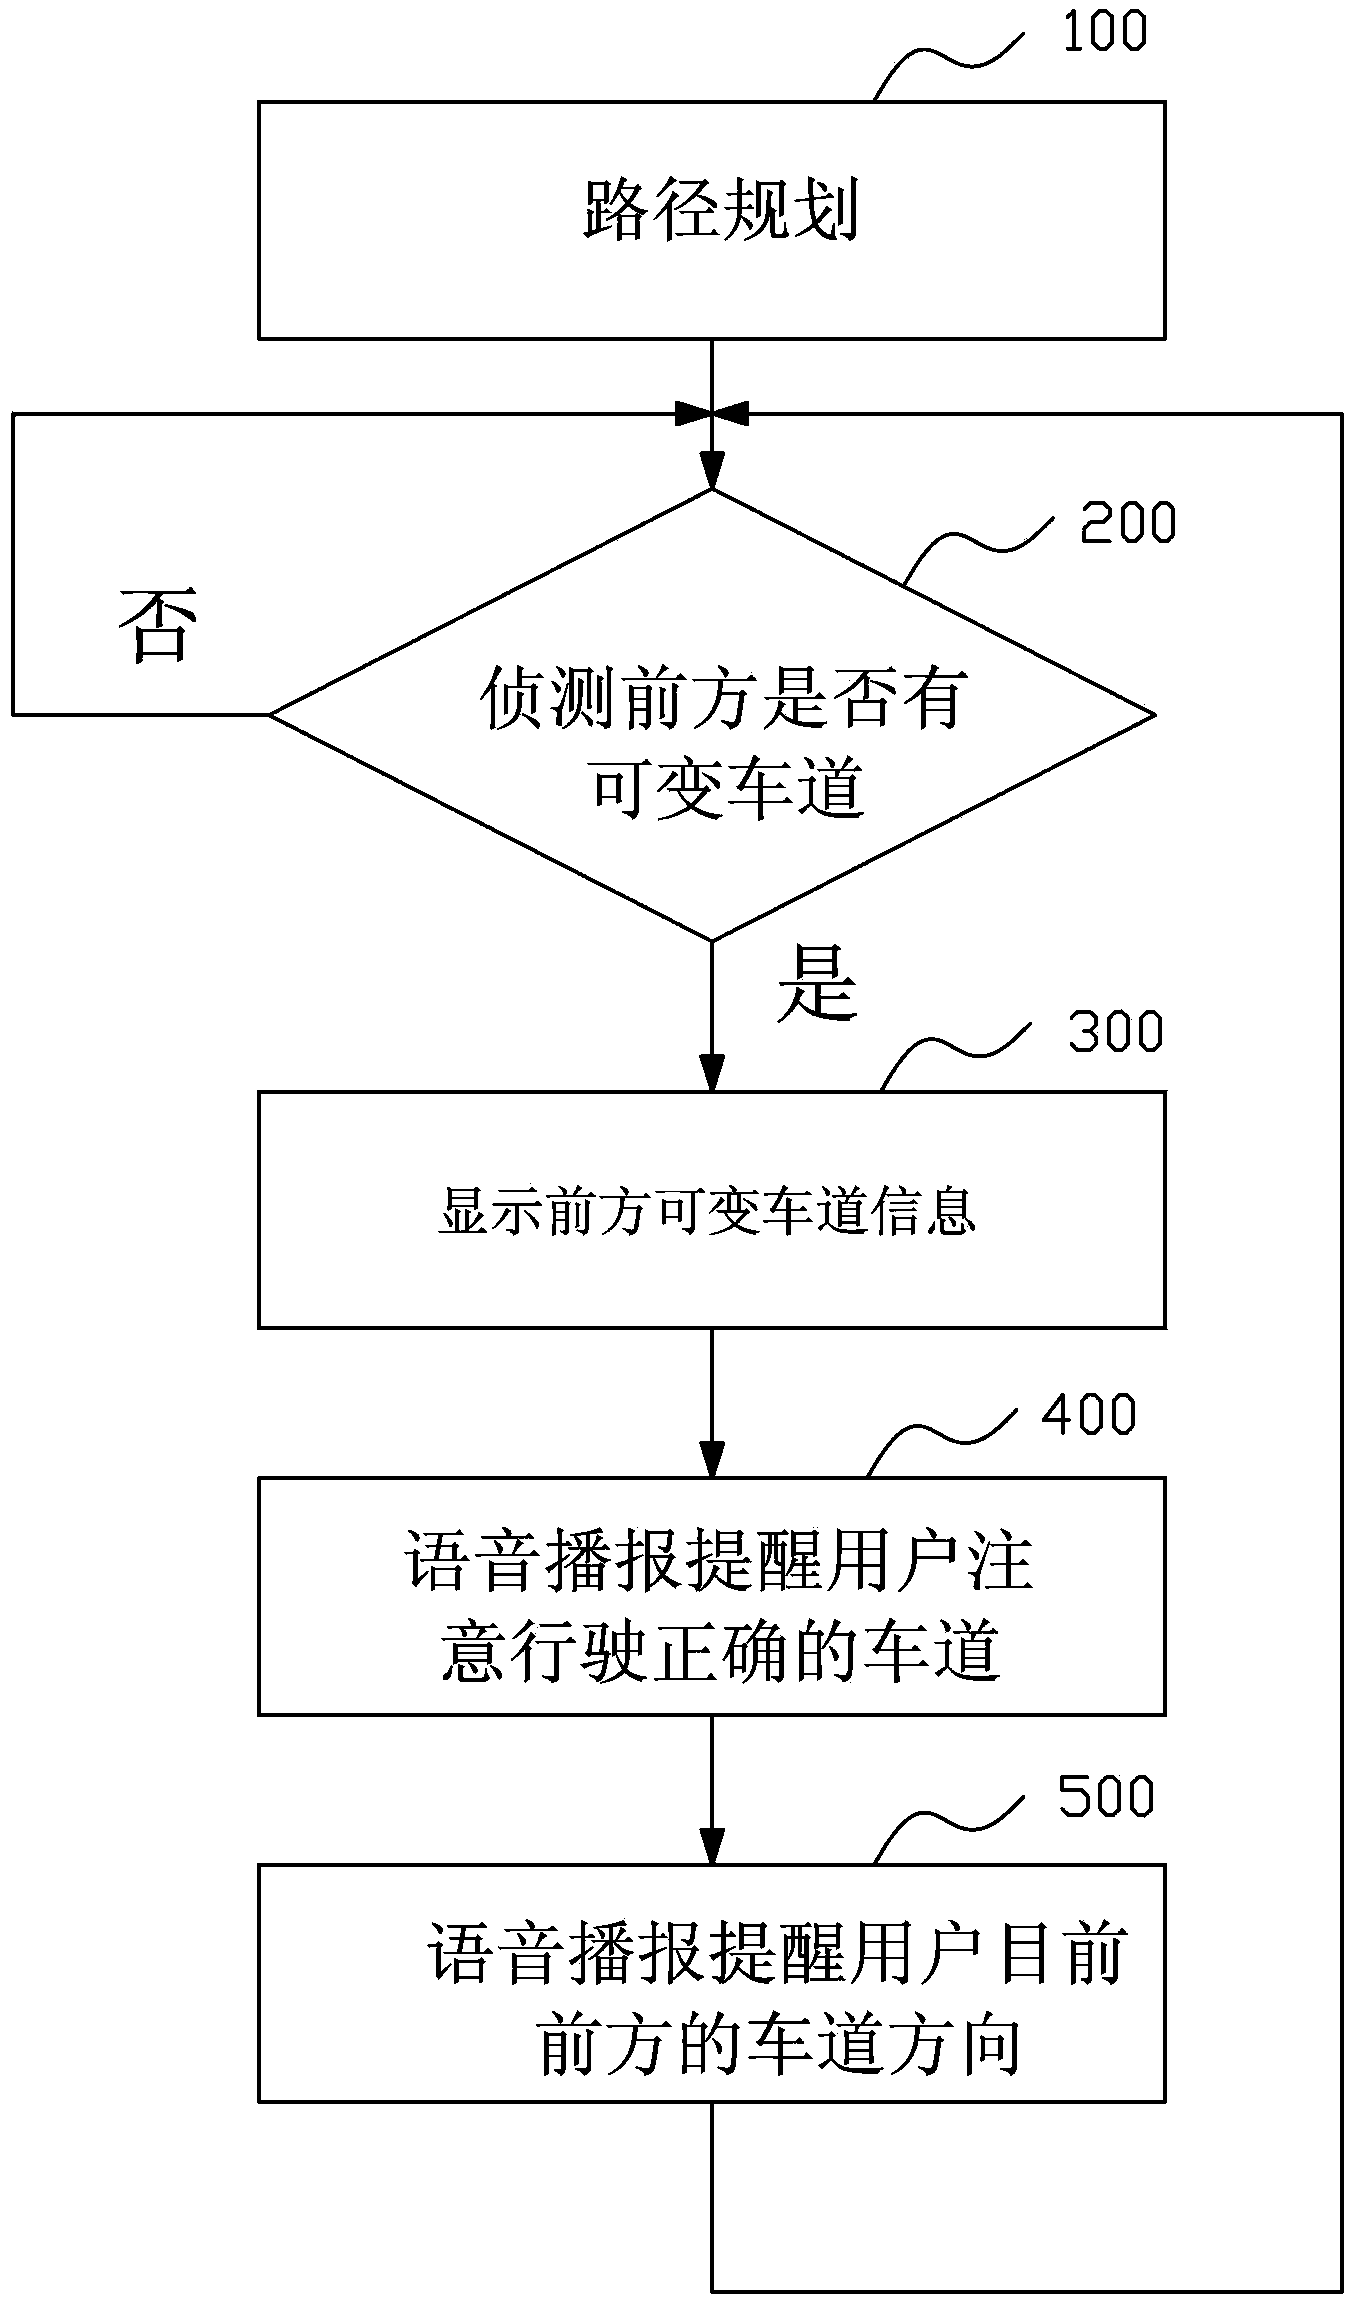 Navigation method capable of indicating and prompting variable lane